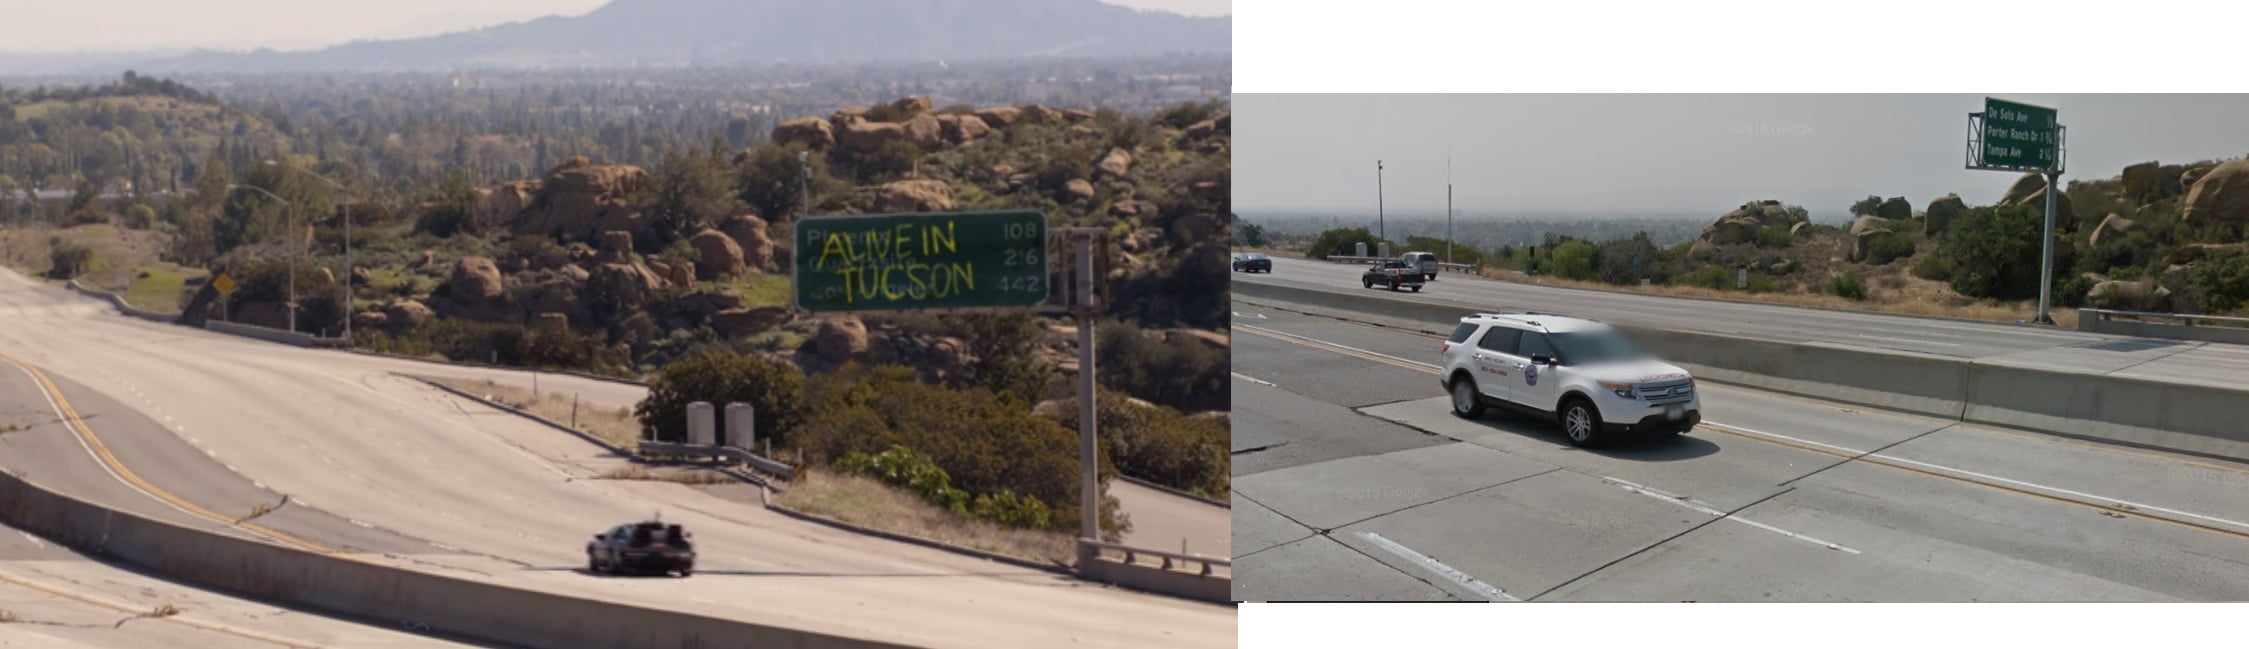 the-last-man-on-earth-filming-locations-30-years-of-science-down the-tubes-118fwy-topanga